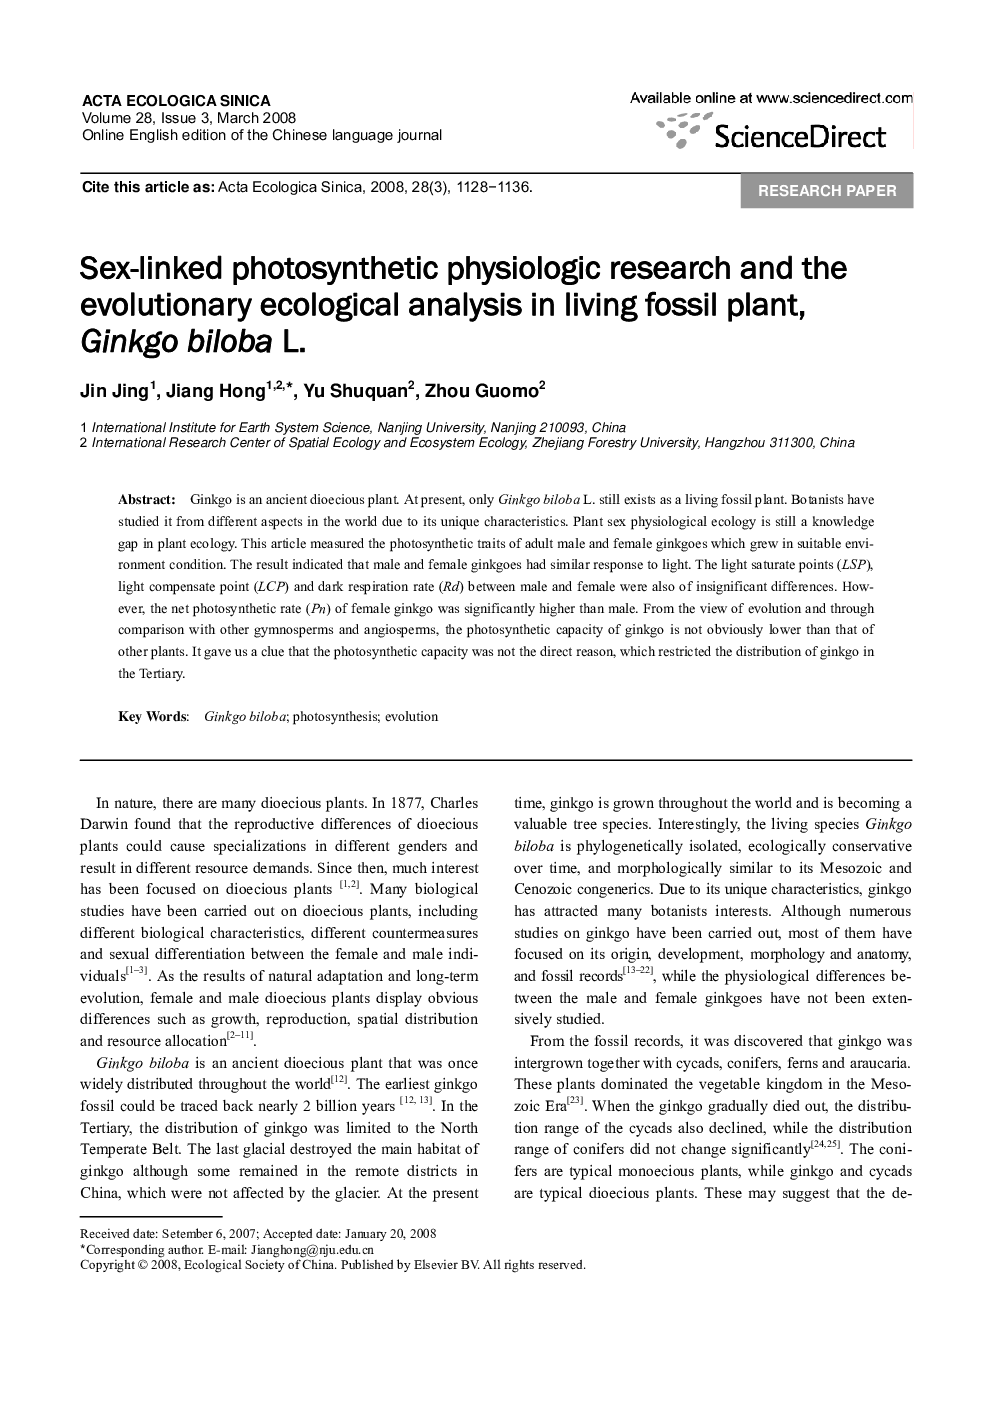 Sex-linked photosynthetic physiologic research and the evolutionary ecological analysis in living fossil plant, Ginkgo biloba L.